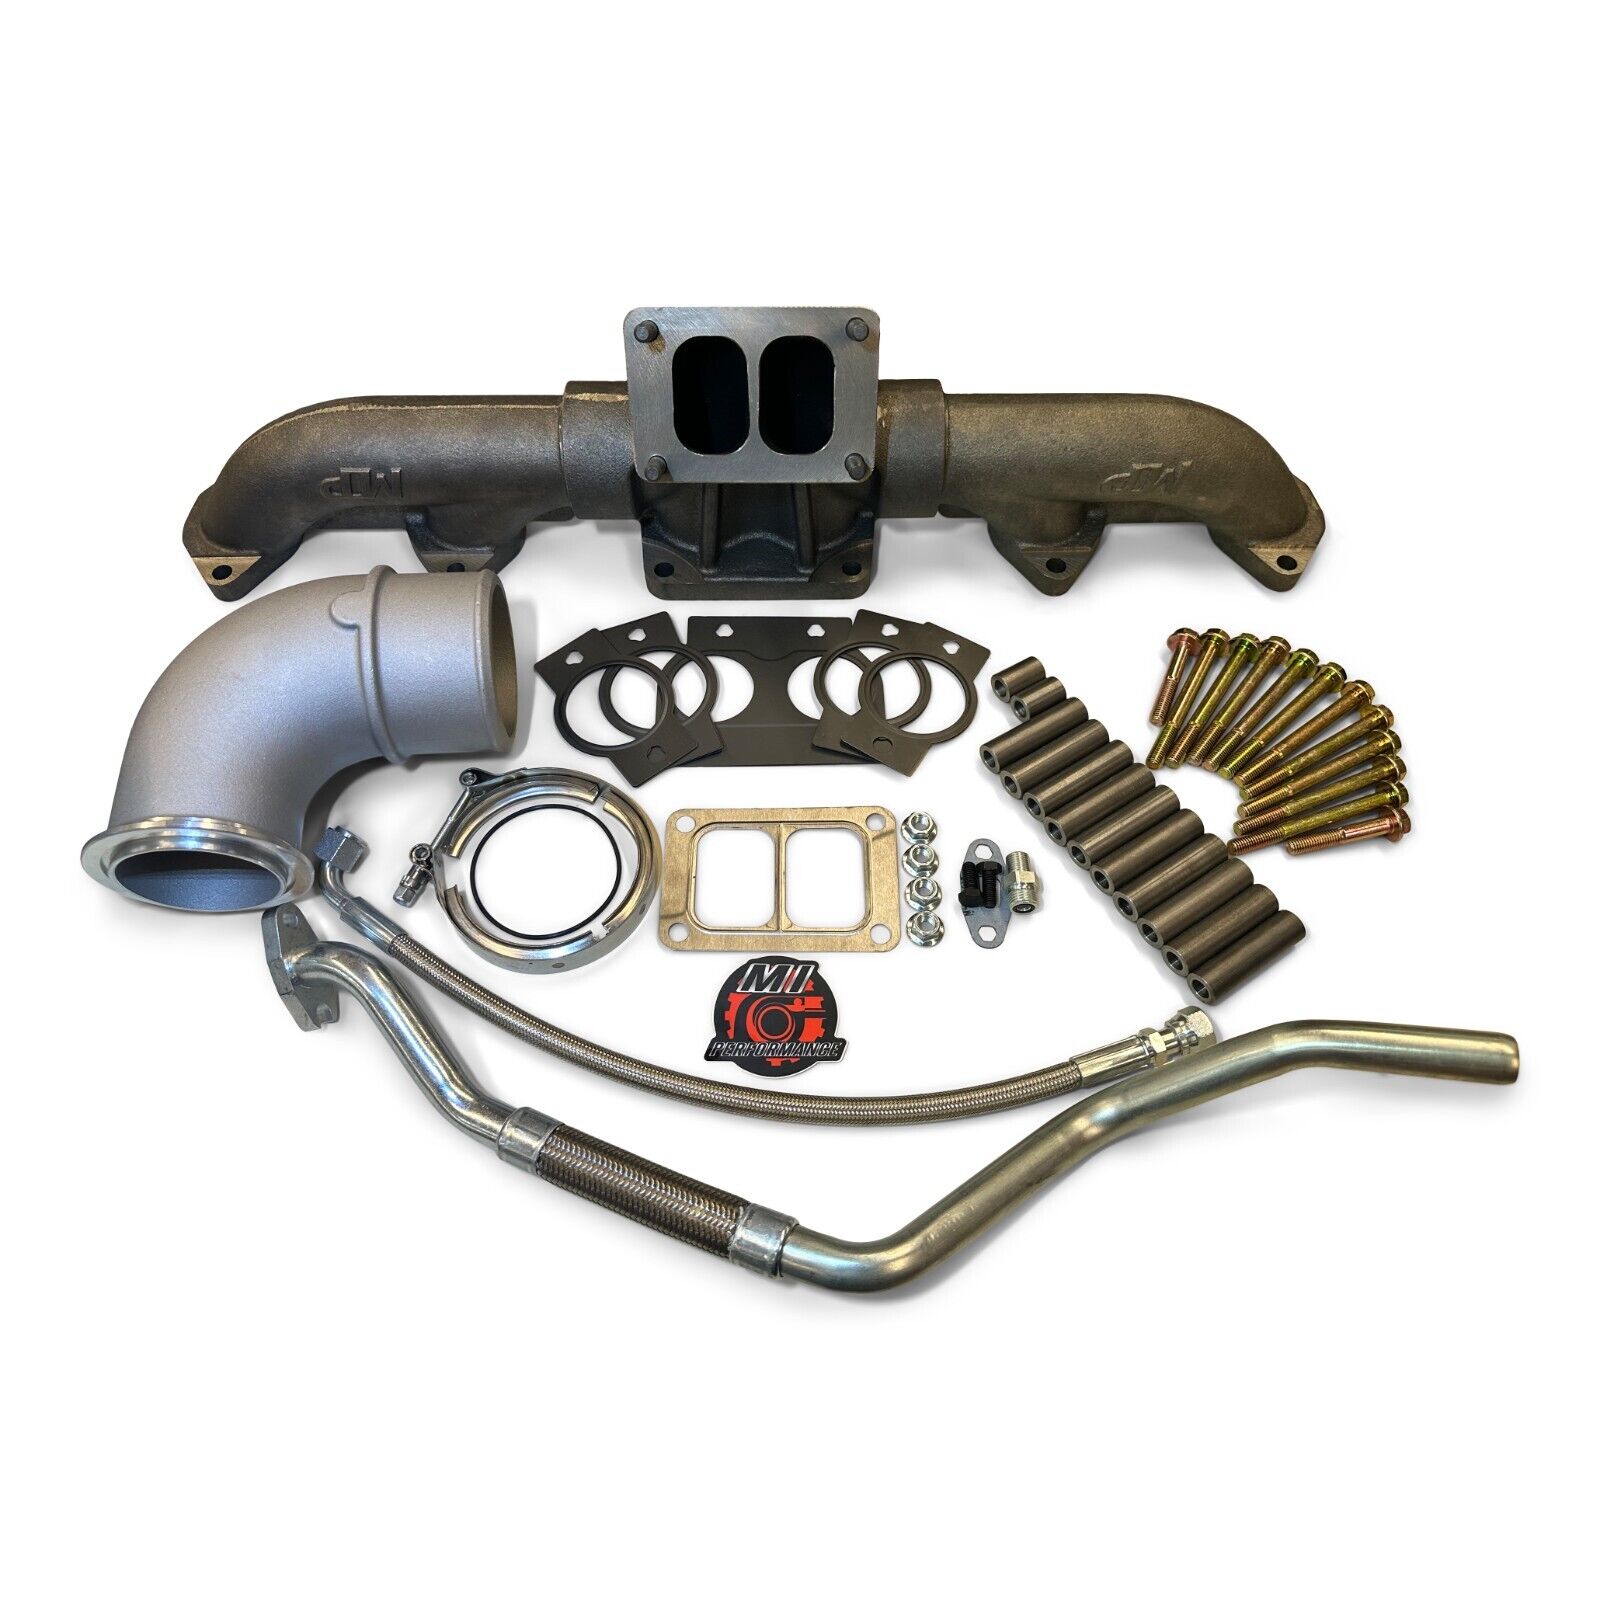 NEW Complete Cummins ISX T6 Manifold Exhaust ISX CM570 Install Kit with 3682674*